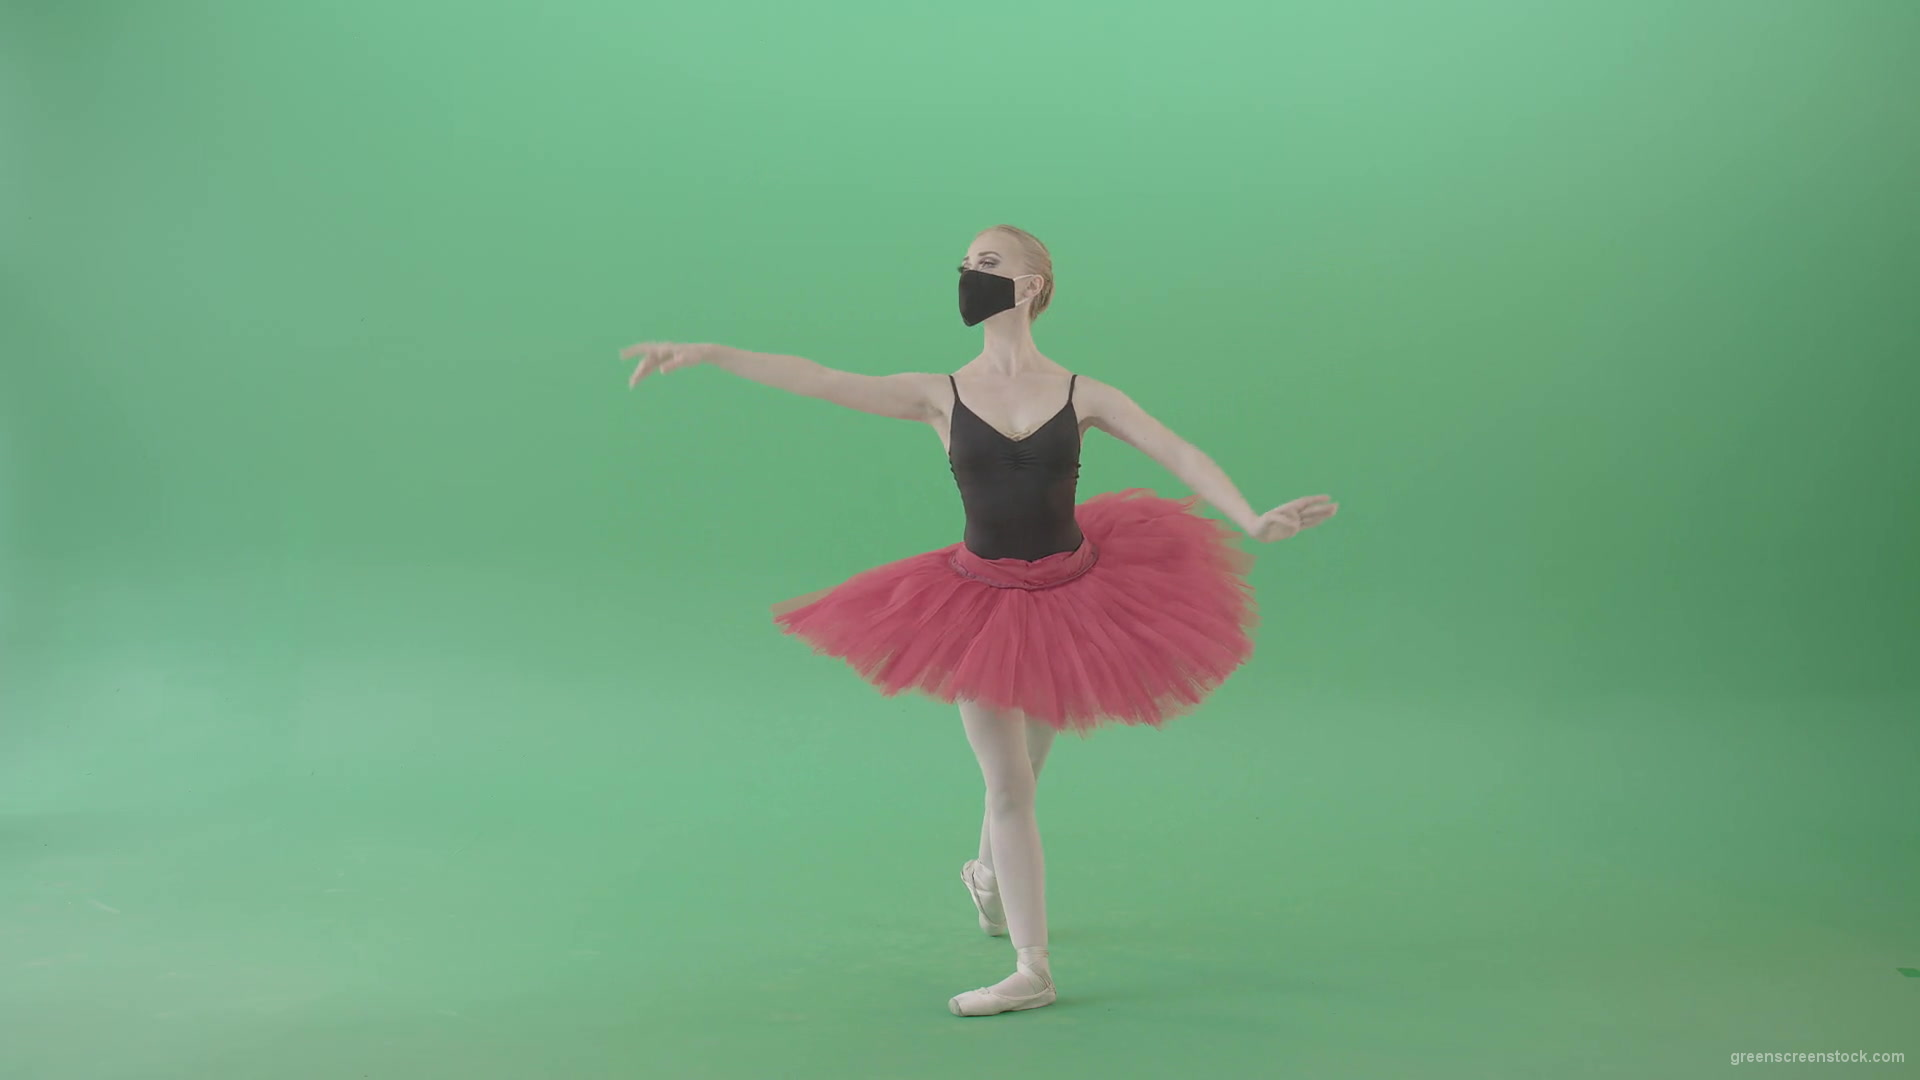 Tinny-Ballet-Dancing-Girl-Ballerina-in-red-black-dress-and-mask-welcome-people-for-awards-Green-Screen-Video-Footage-1920_008 Green Screen Stock